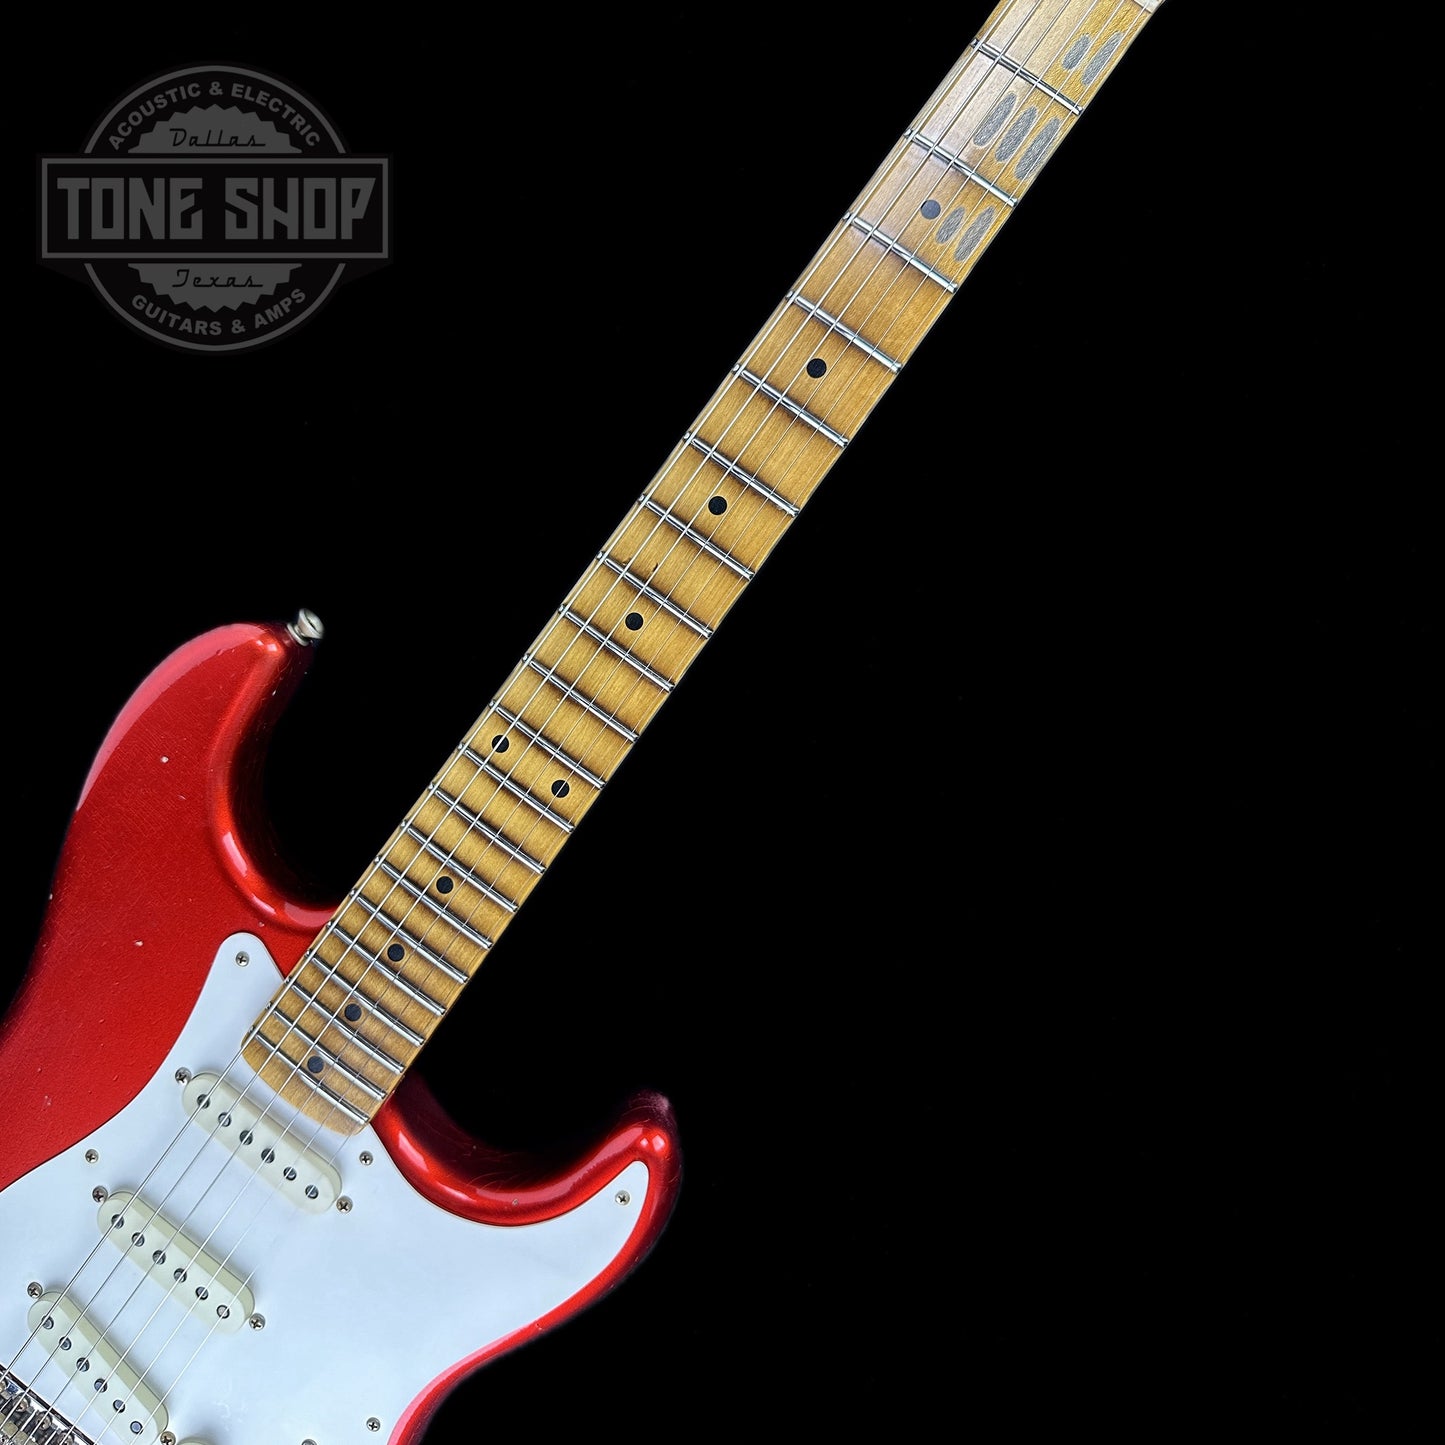 Fretboard of Fender Custom Shop Limited Edition 56 Strat Journeyman Relic Super Faded Aged Candy Apple Red.